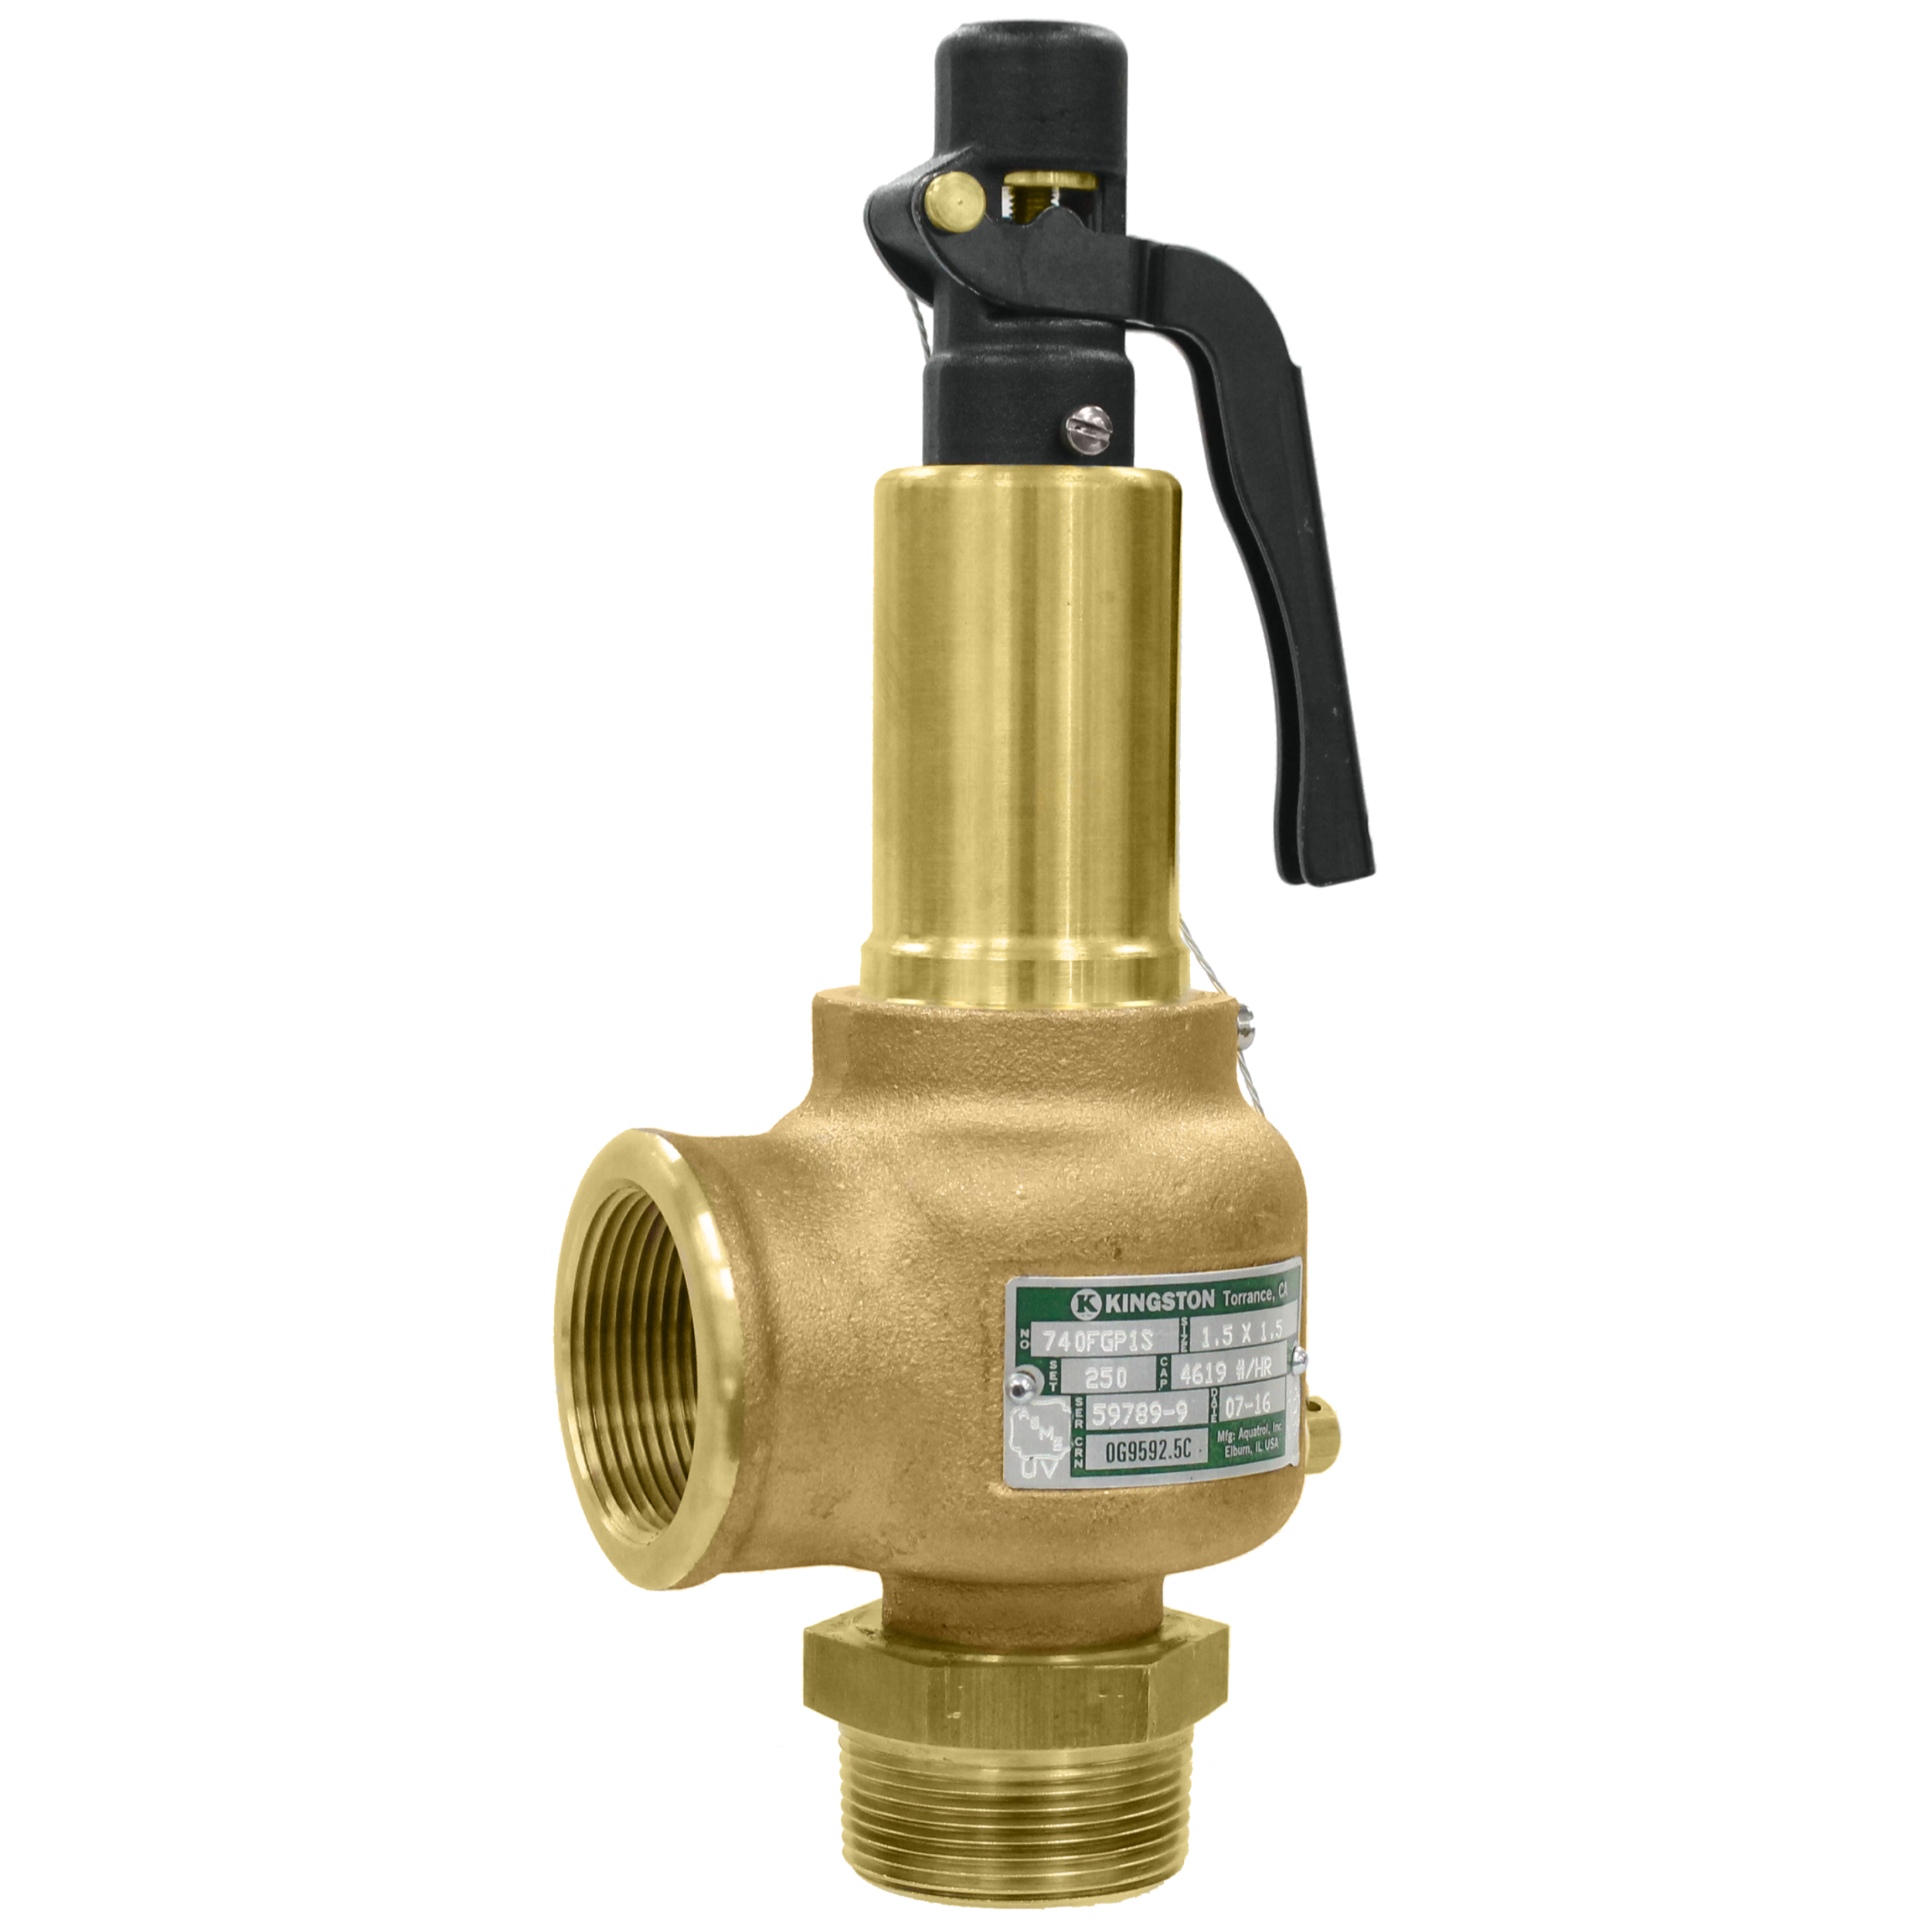 225 psi 1/2 Inlet x 1 Outlet ASME Section VIII Air/Gas Buna-N Disc Kingston Valves 710D46N1K1-225 Model 710 Safety Valve Open Lever 1/2 Inlet x 1 Outlet Brass Body and Trim D Orifice 